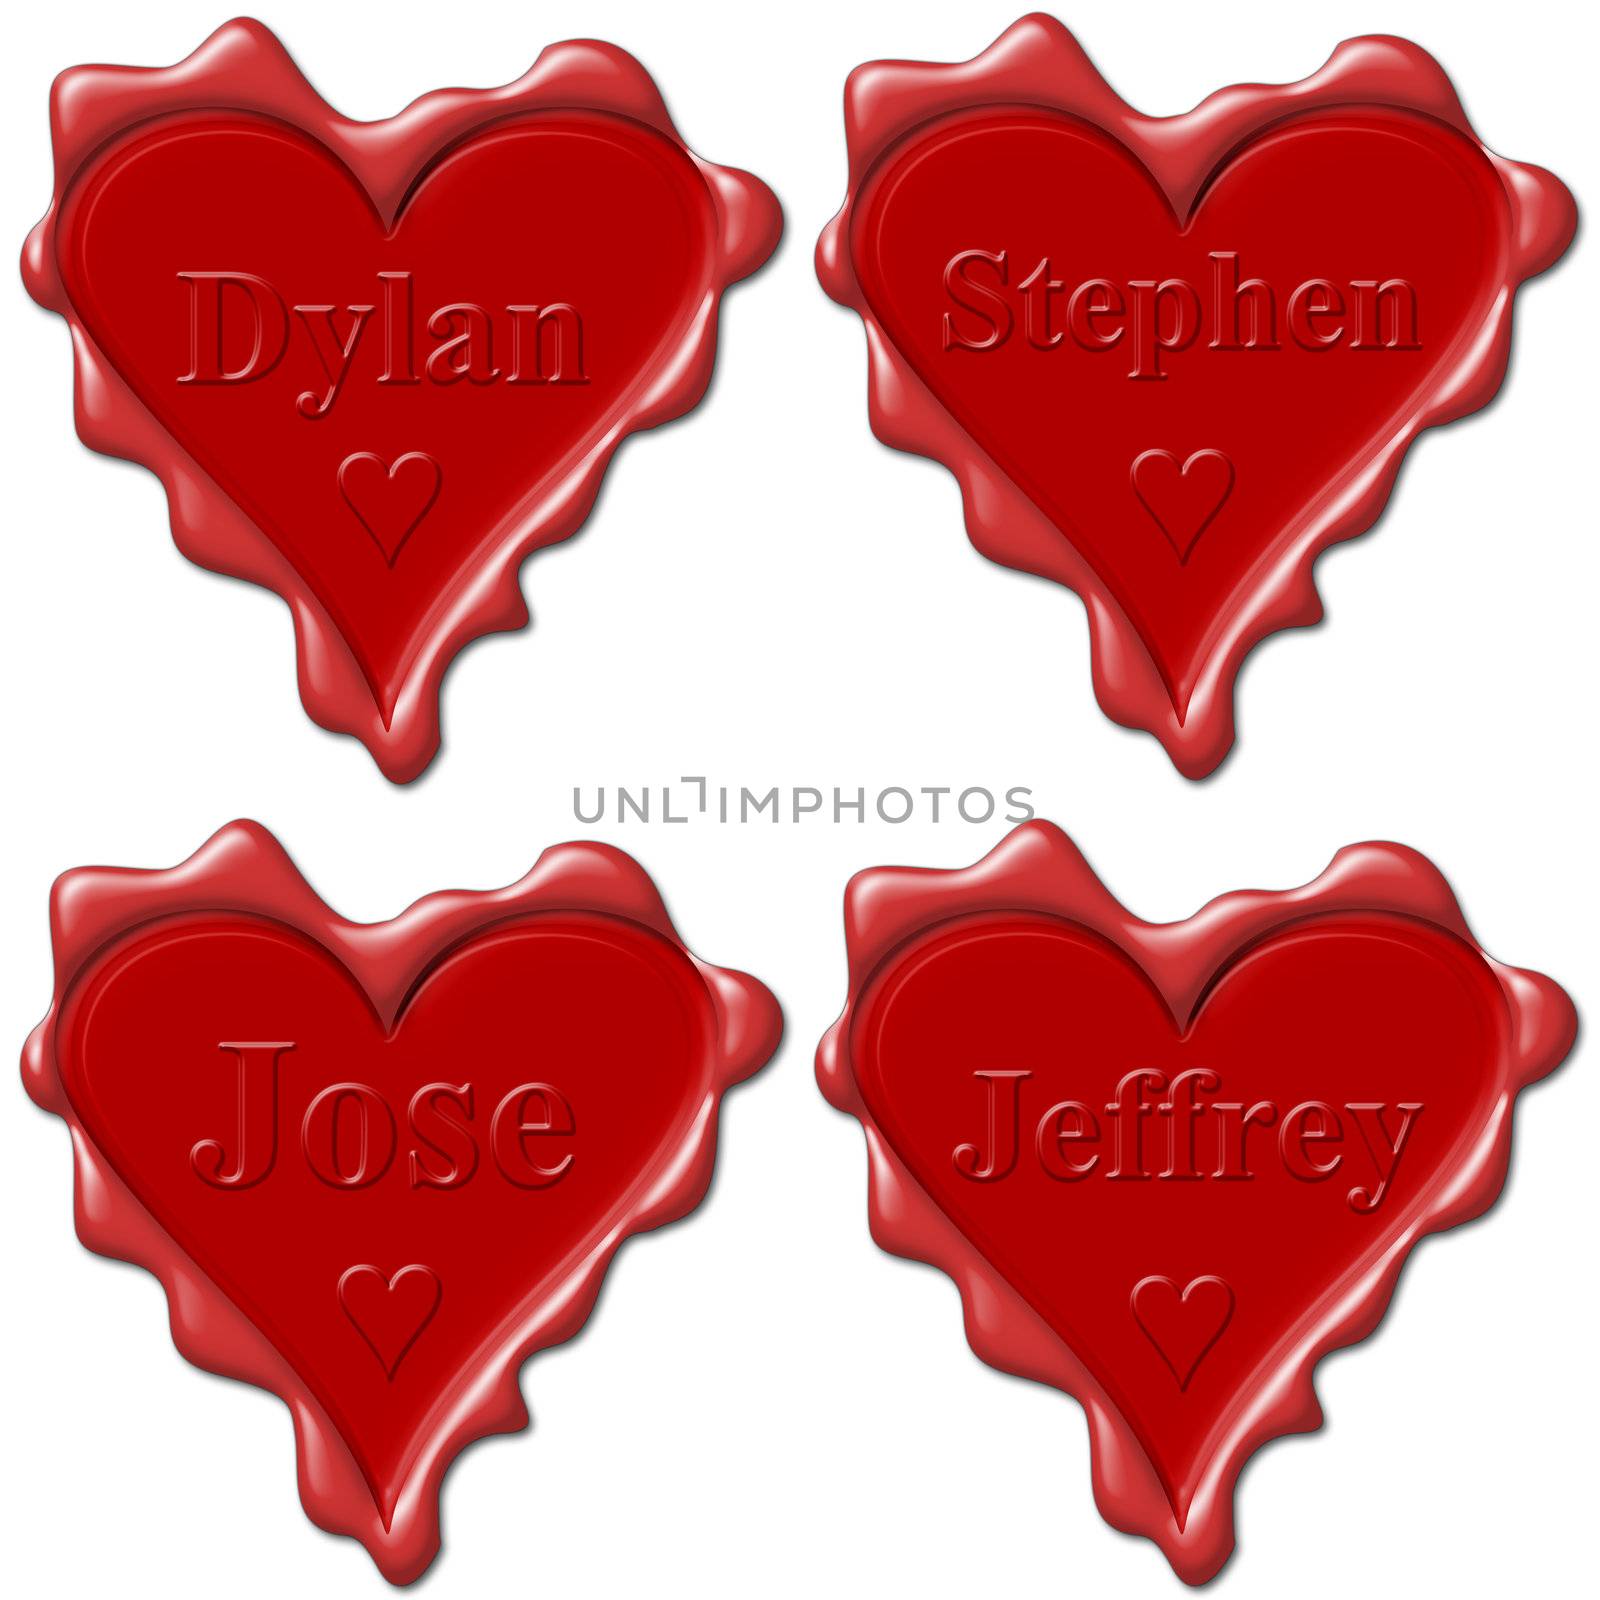 Valentine love hearts with names: Dylan , Stephen, Jose, Jeffrey